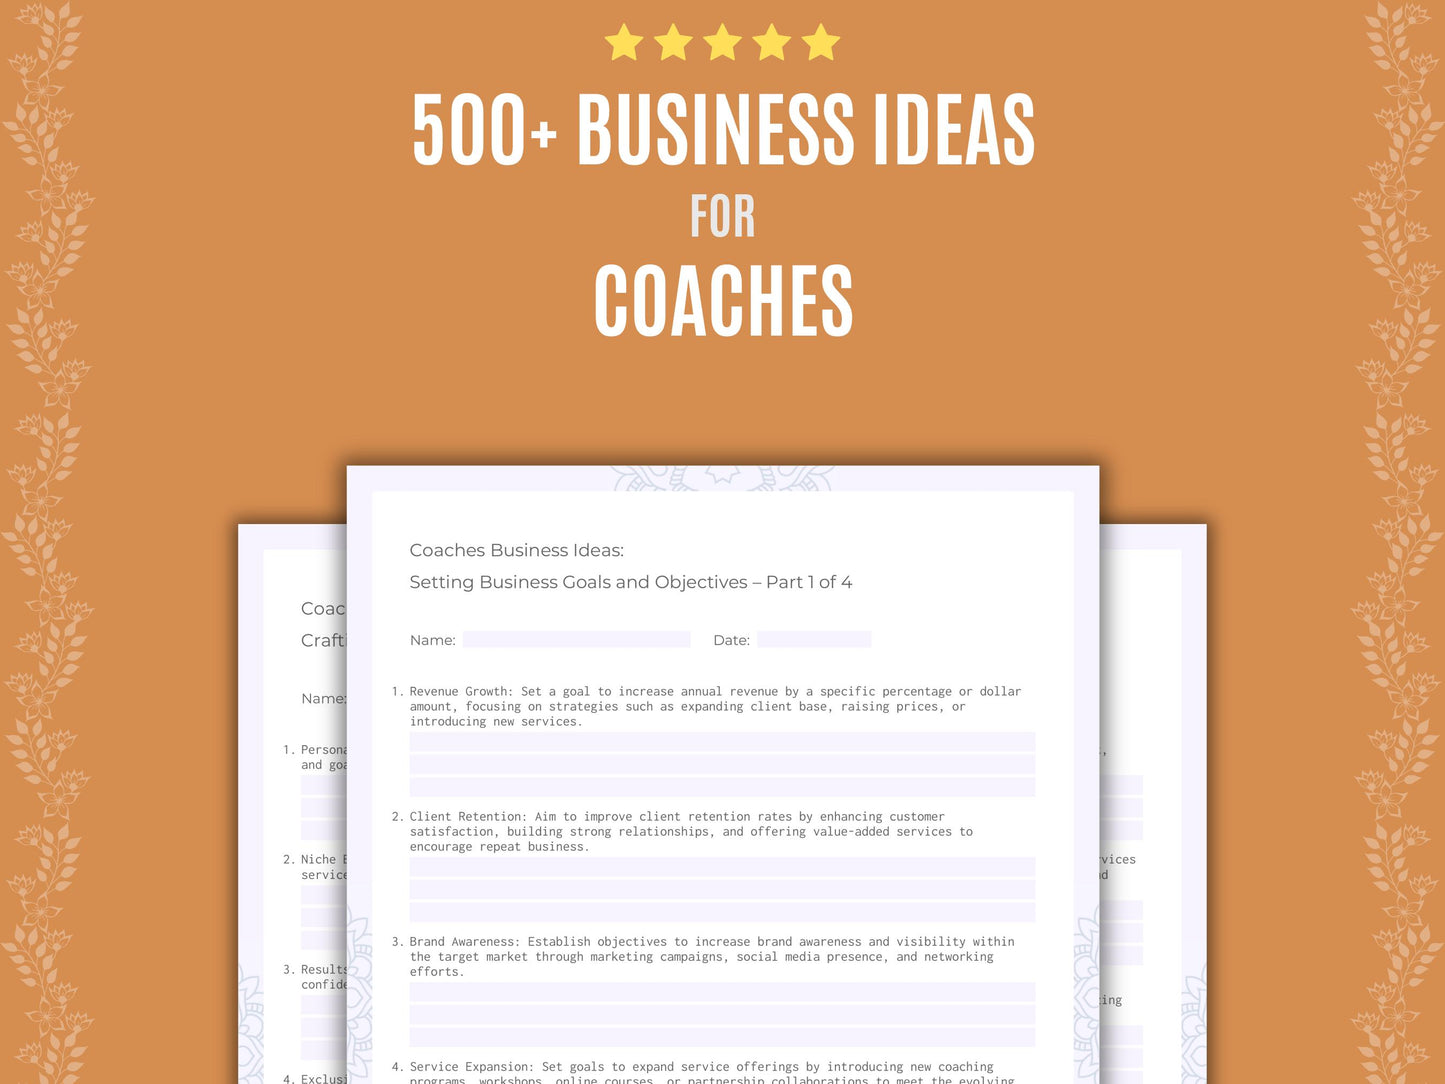 Coaches Business